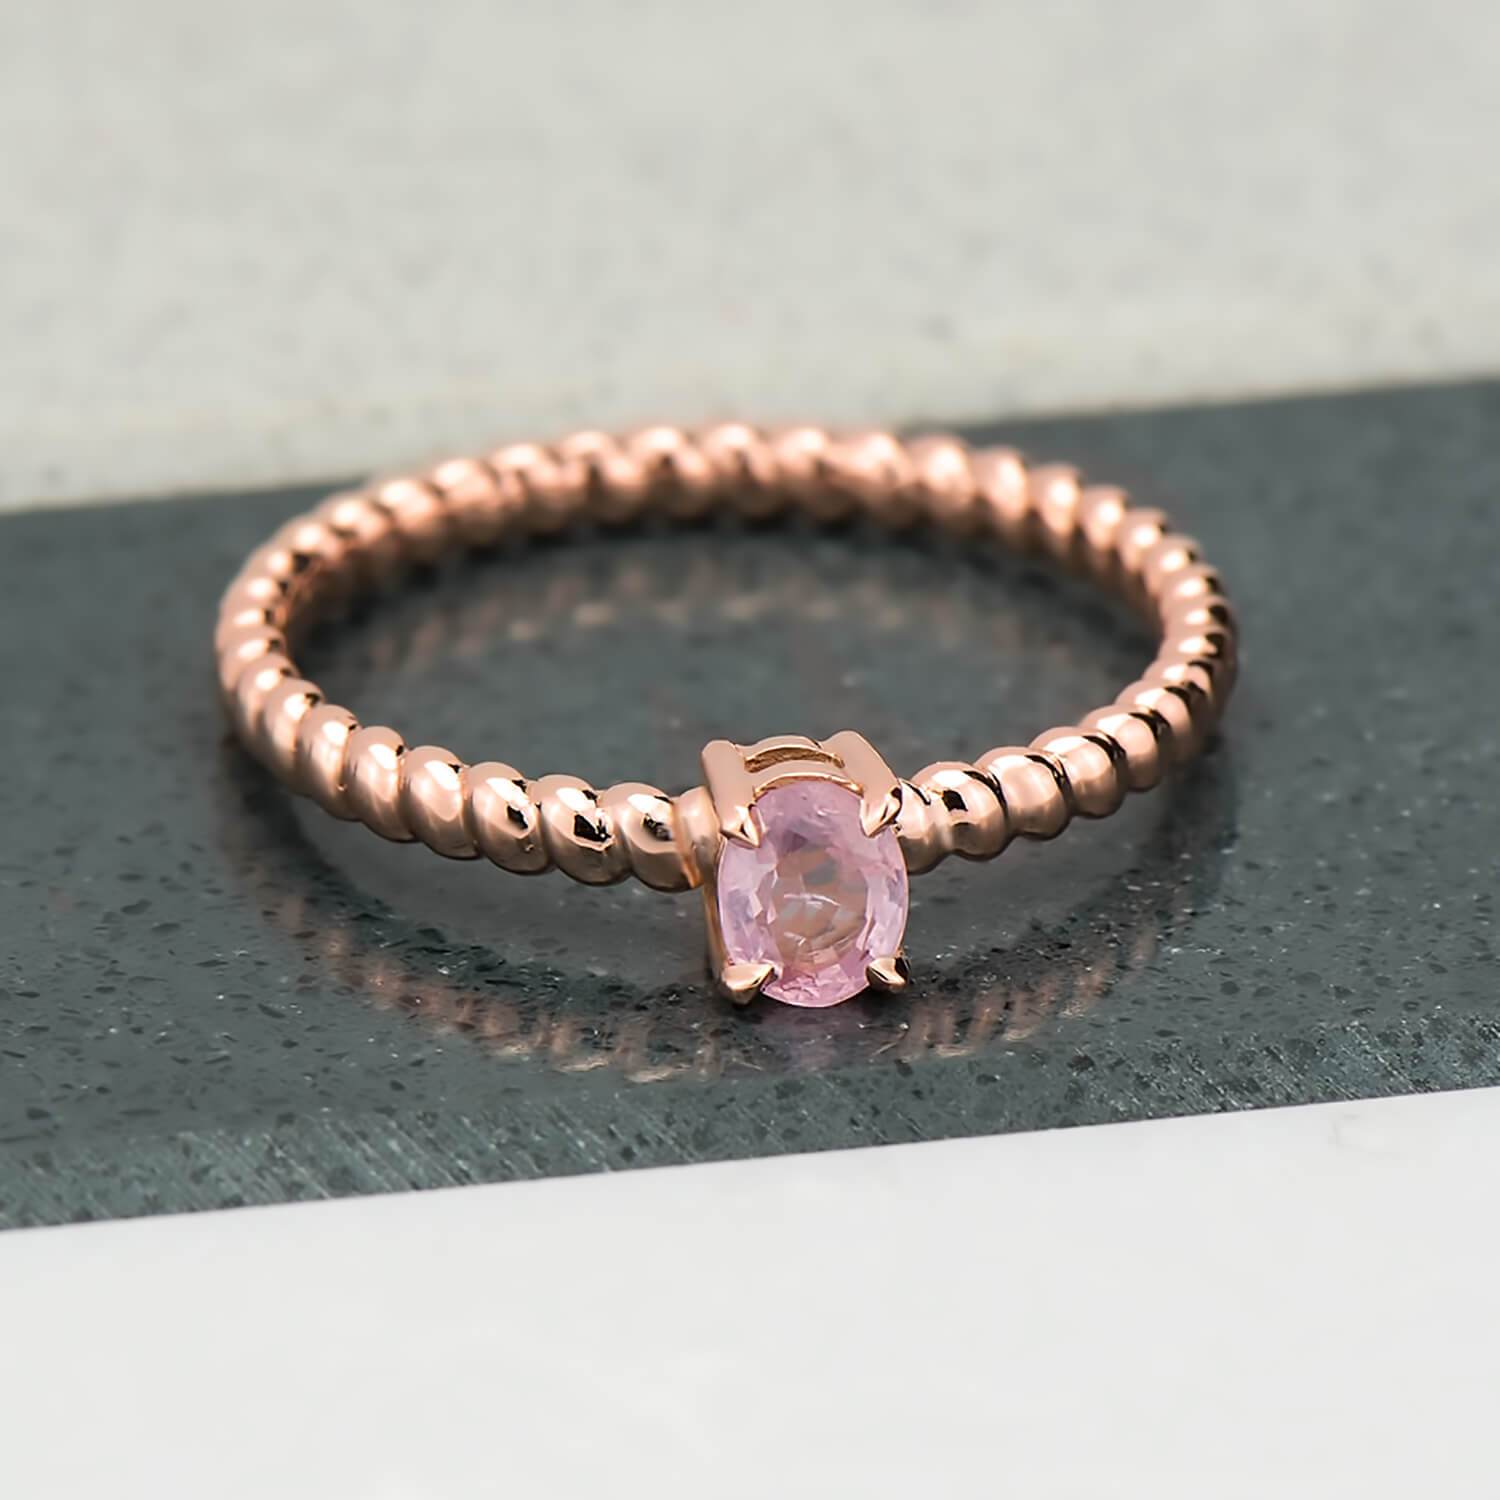 Recycled 14 karat rose gold spiral ring i which has been brought to a high polish. A four prong setting holds a natural 0.29 carat oval pink sapphire.